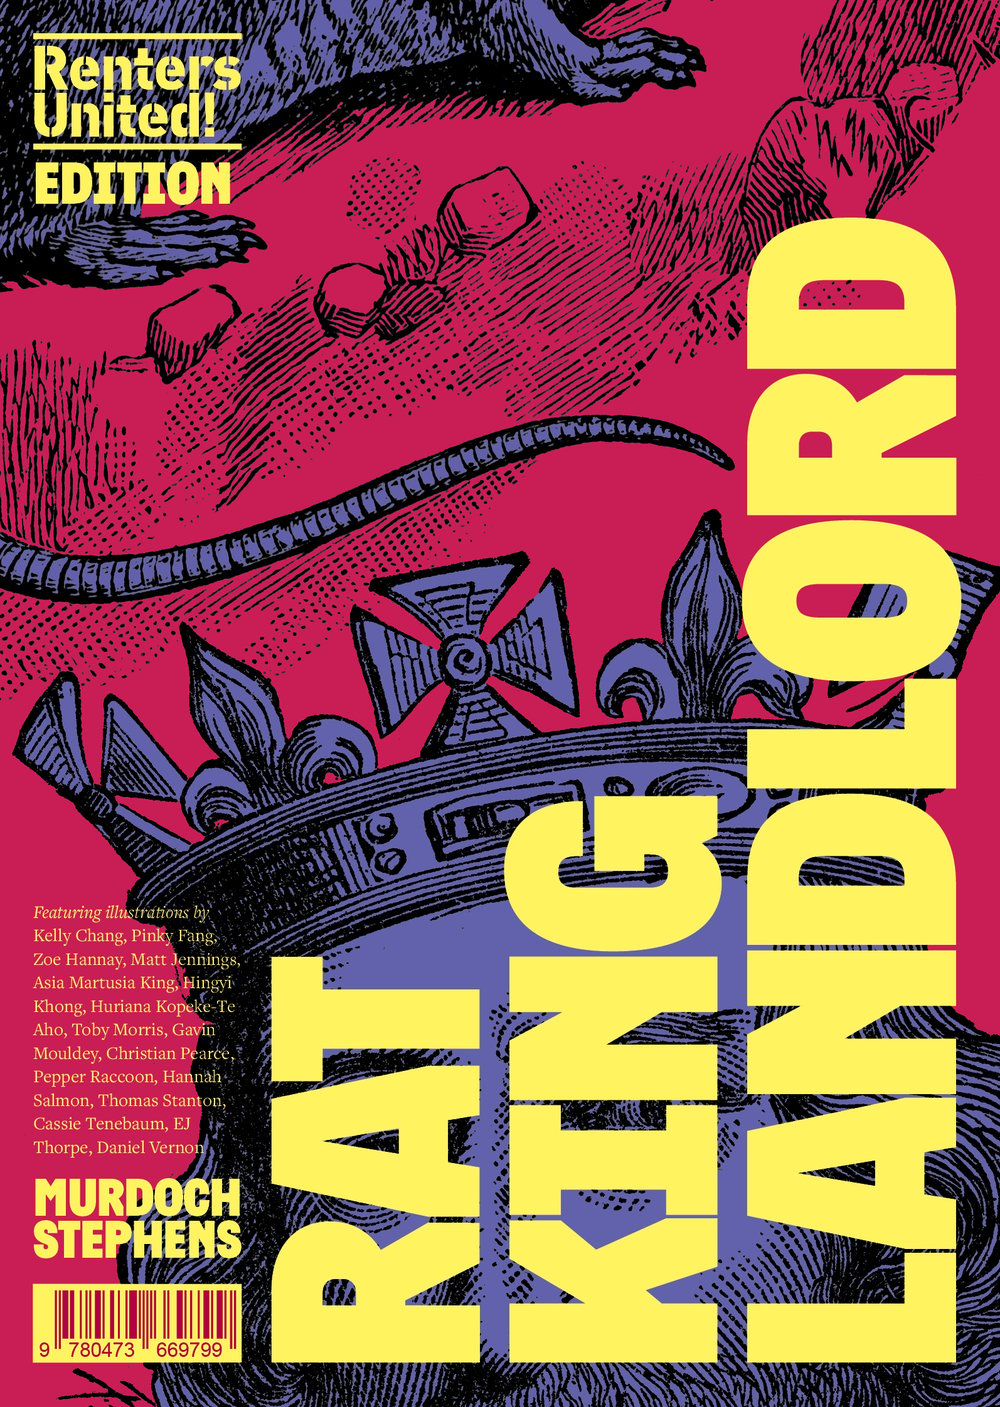 Rat King Landlord (Renters United edition), by Murdoch Stephens